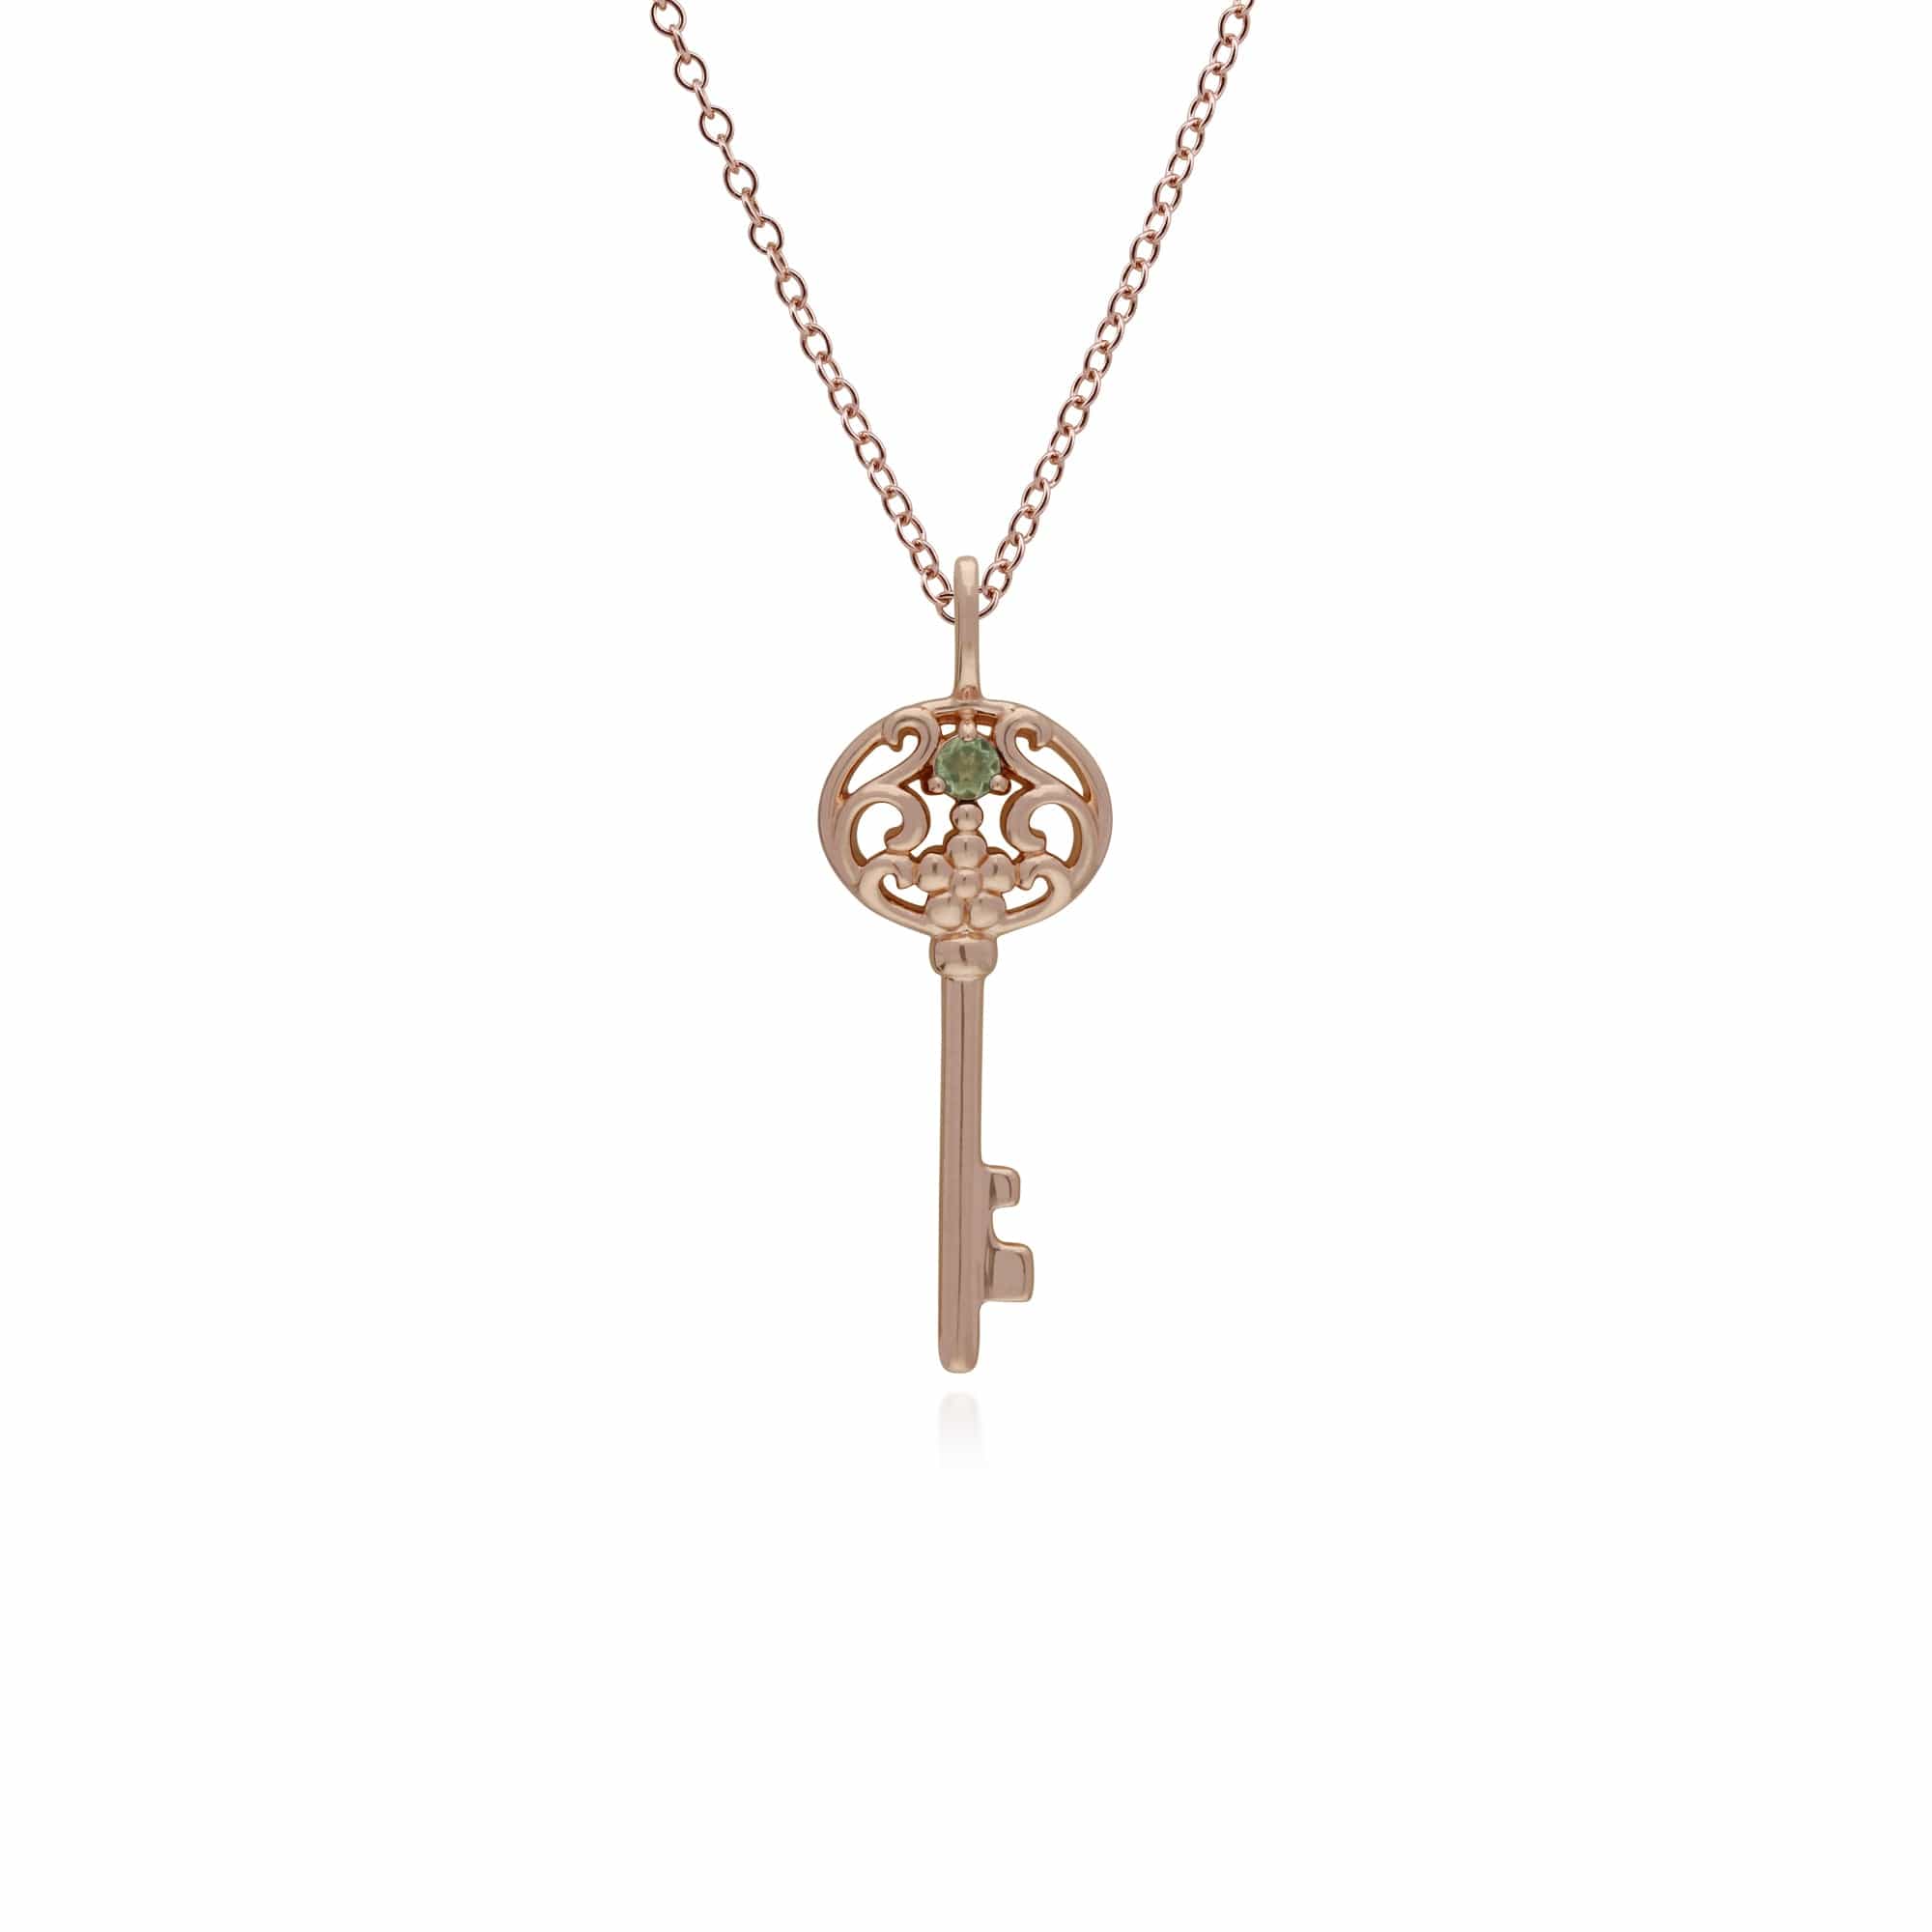 270P026708925-270P026901925 Classic Heart Lock Pendant & Peridot Big Key Charm in Rose Gold Plated 925 Sterling Silver 2